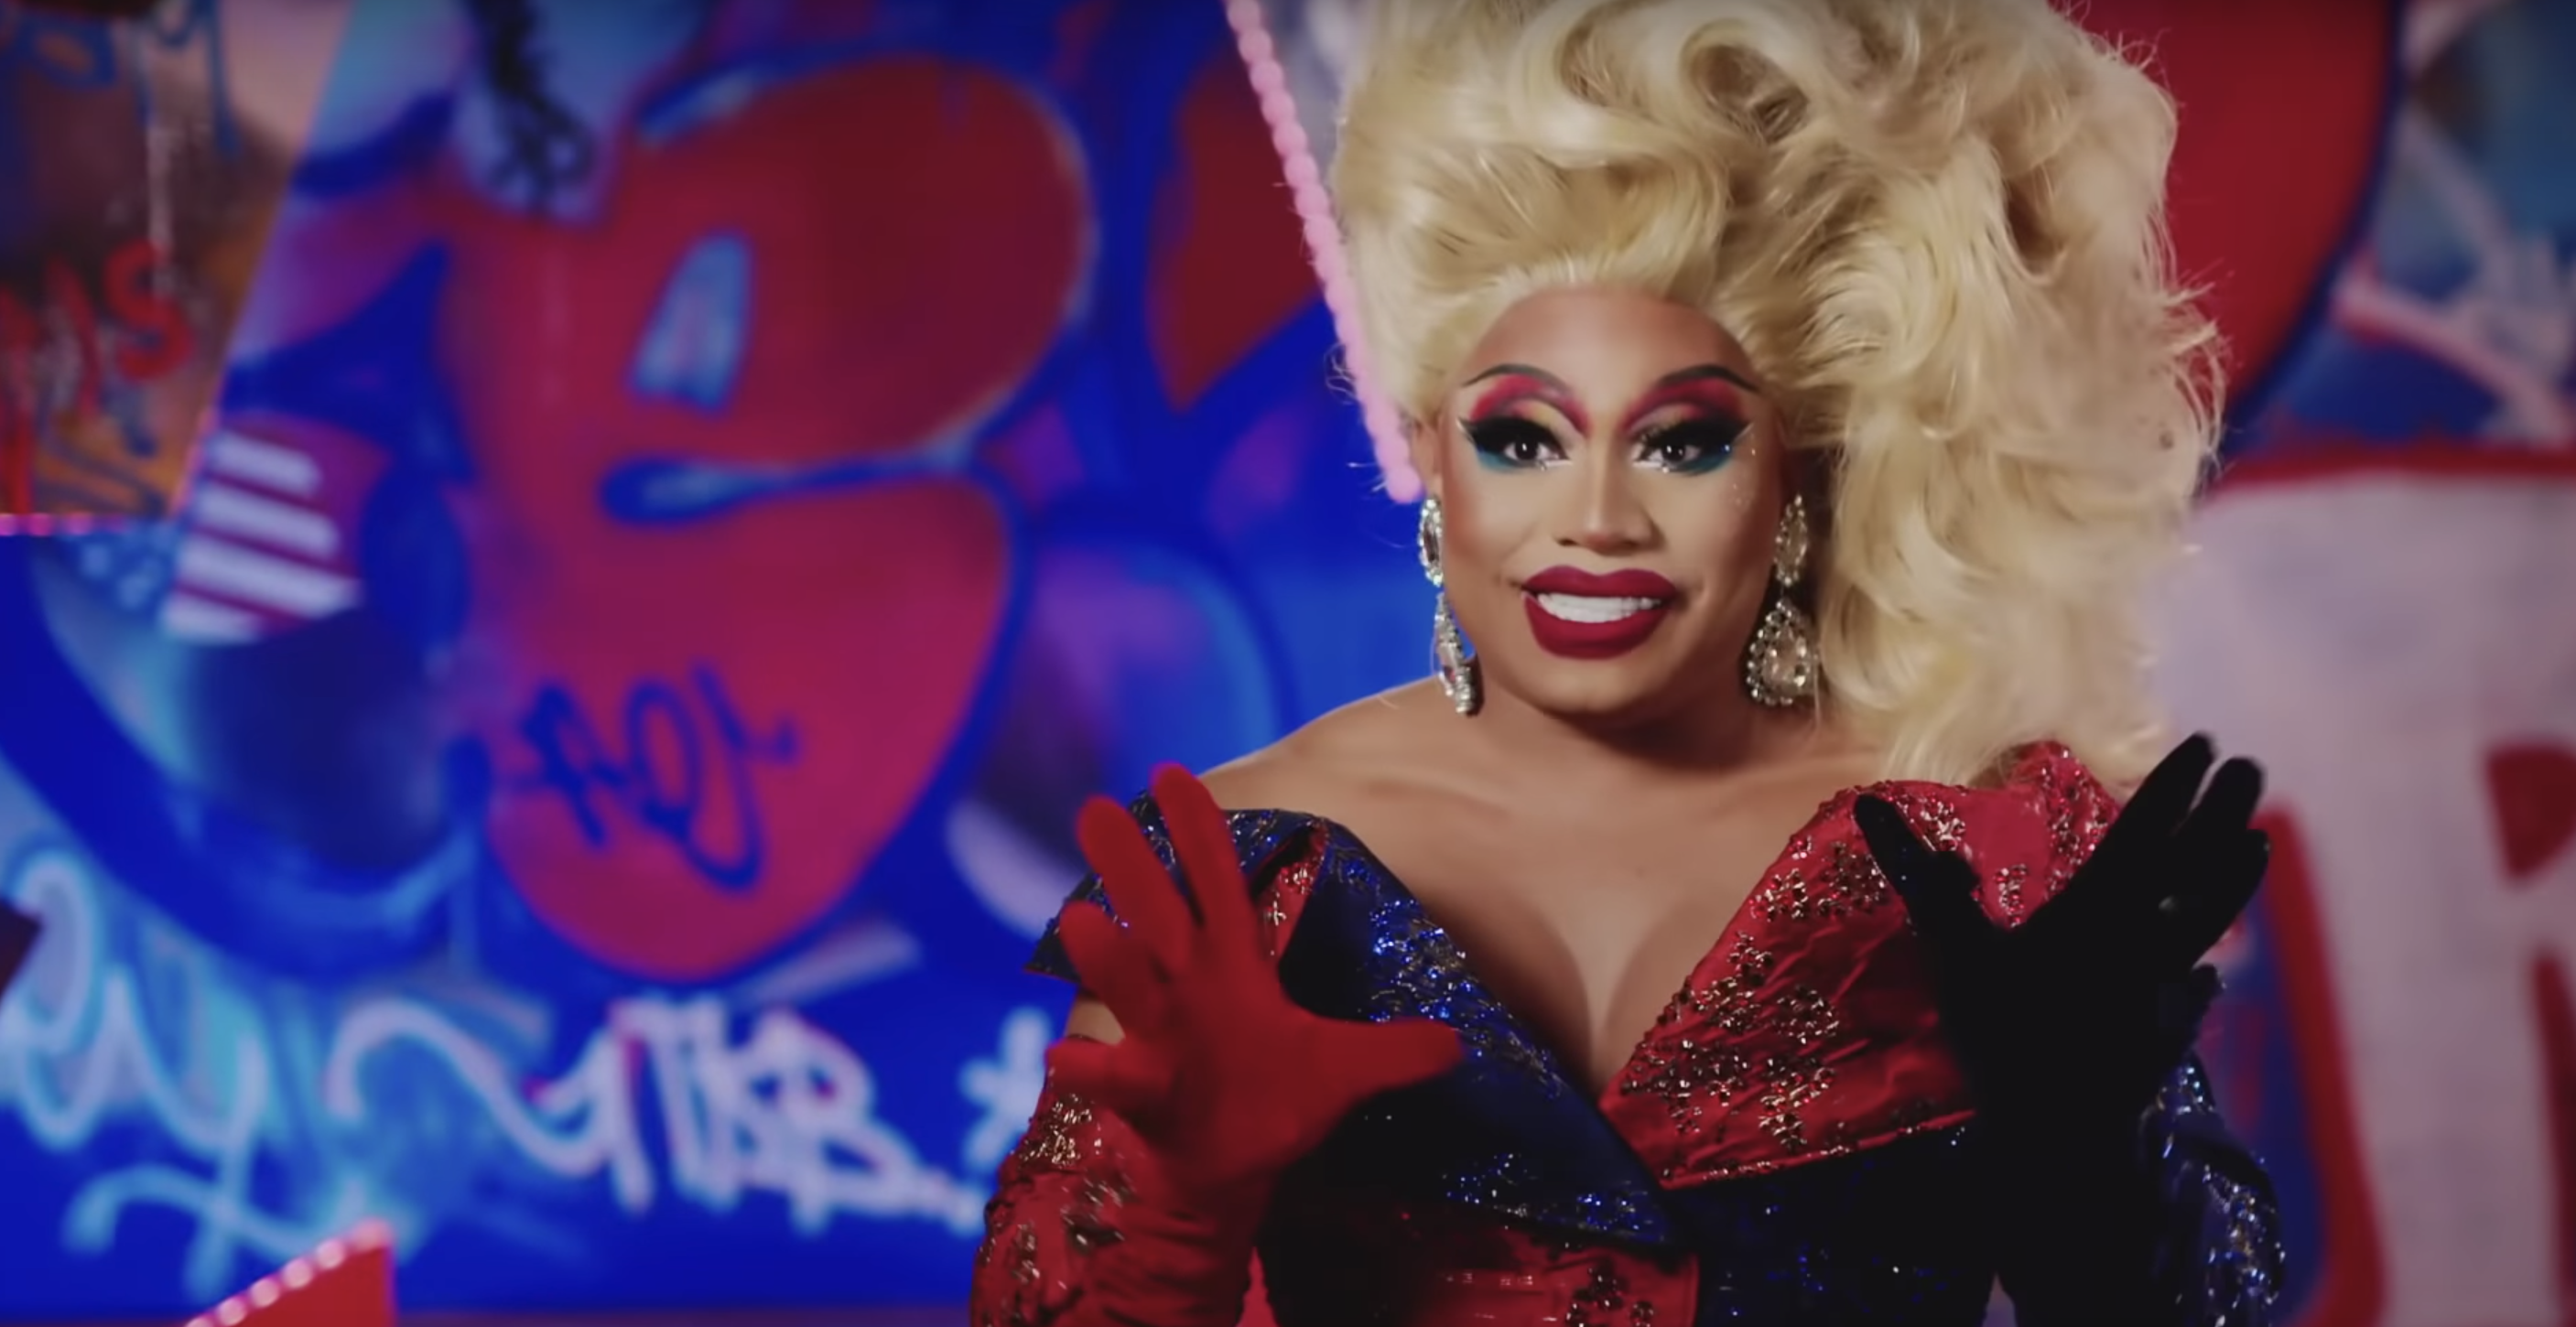 How to watch RuPaul’s Drag Race: Untucked season 12 - stream from the UK and USA!